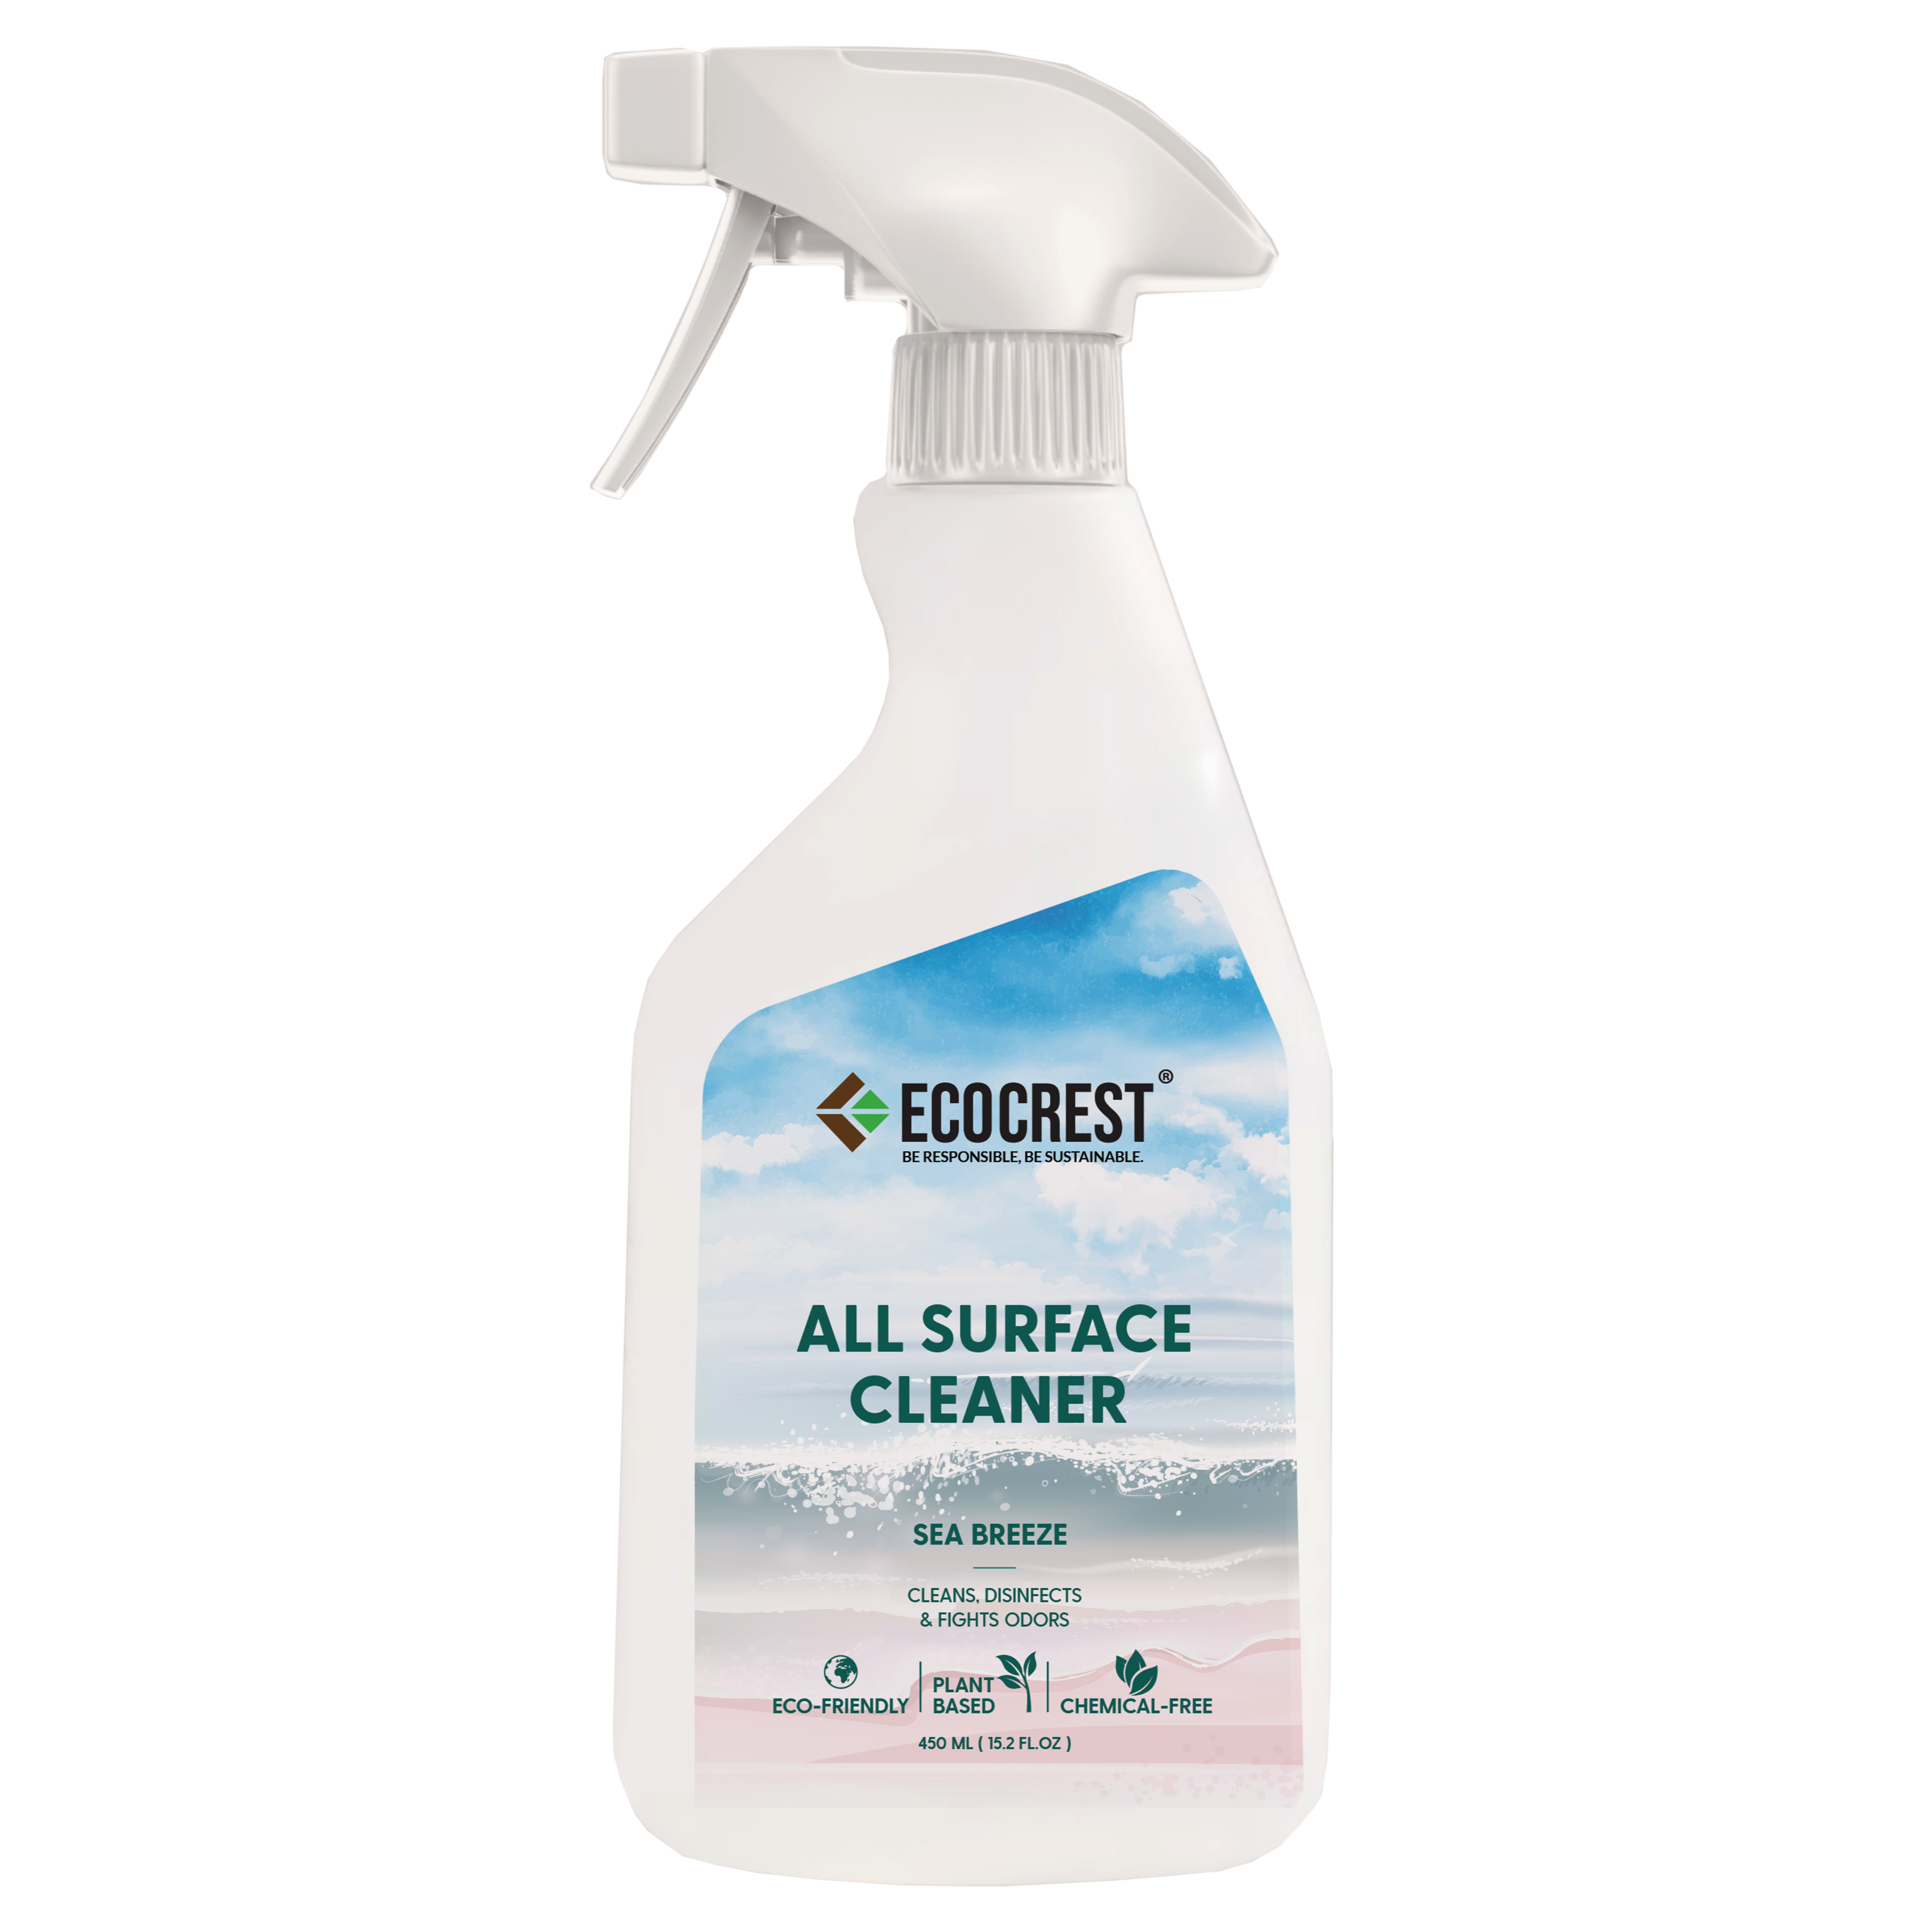 ALL SURFACE CLEANER